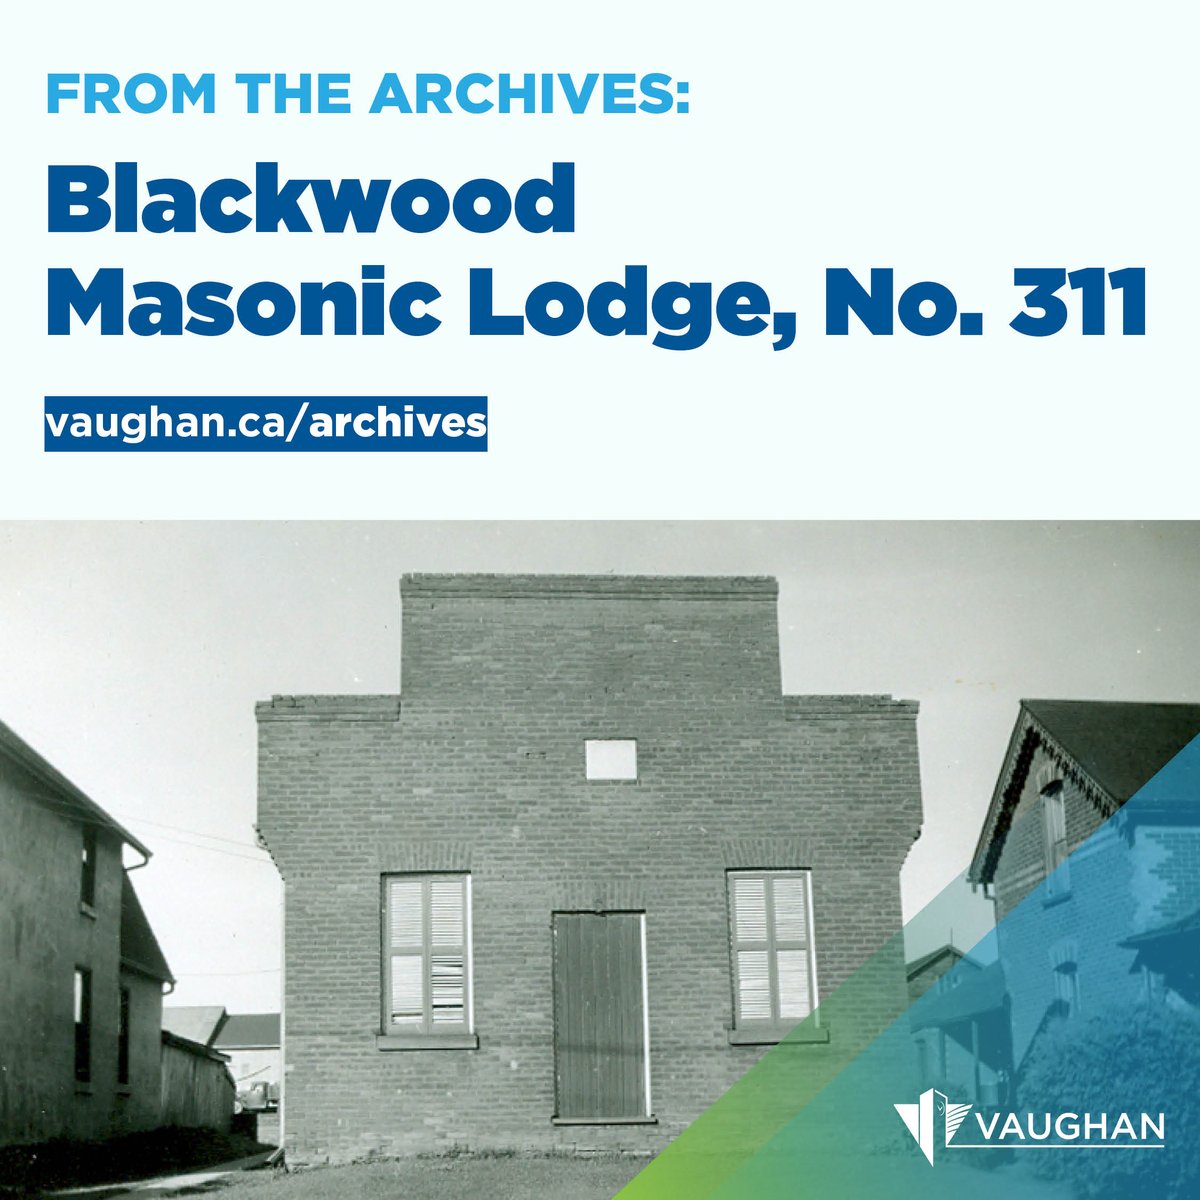 Let’s look back at our history and share the stories of the people, places and moments that helped shape the city we know today. This month features the Blackwood Masonic Lodge, No. 311, which is celebrating its 150th anniversary this year! Learn more: vaughan.ca/news/archives-1